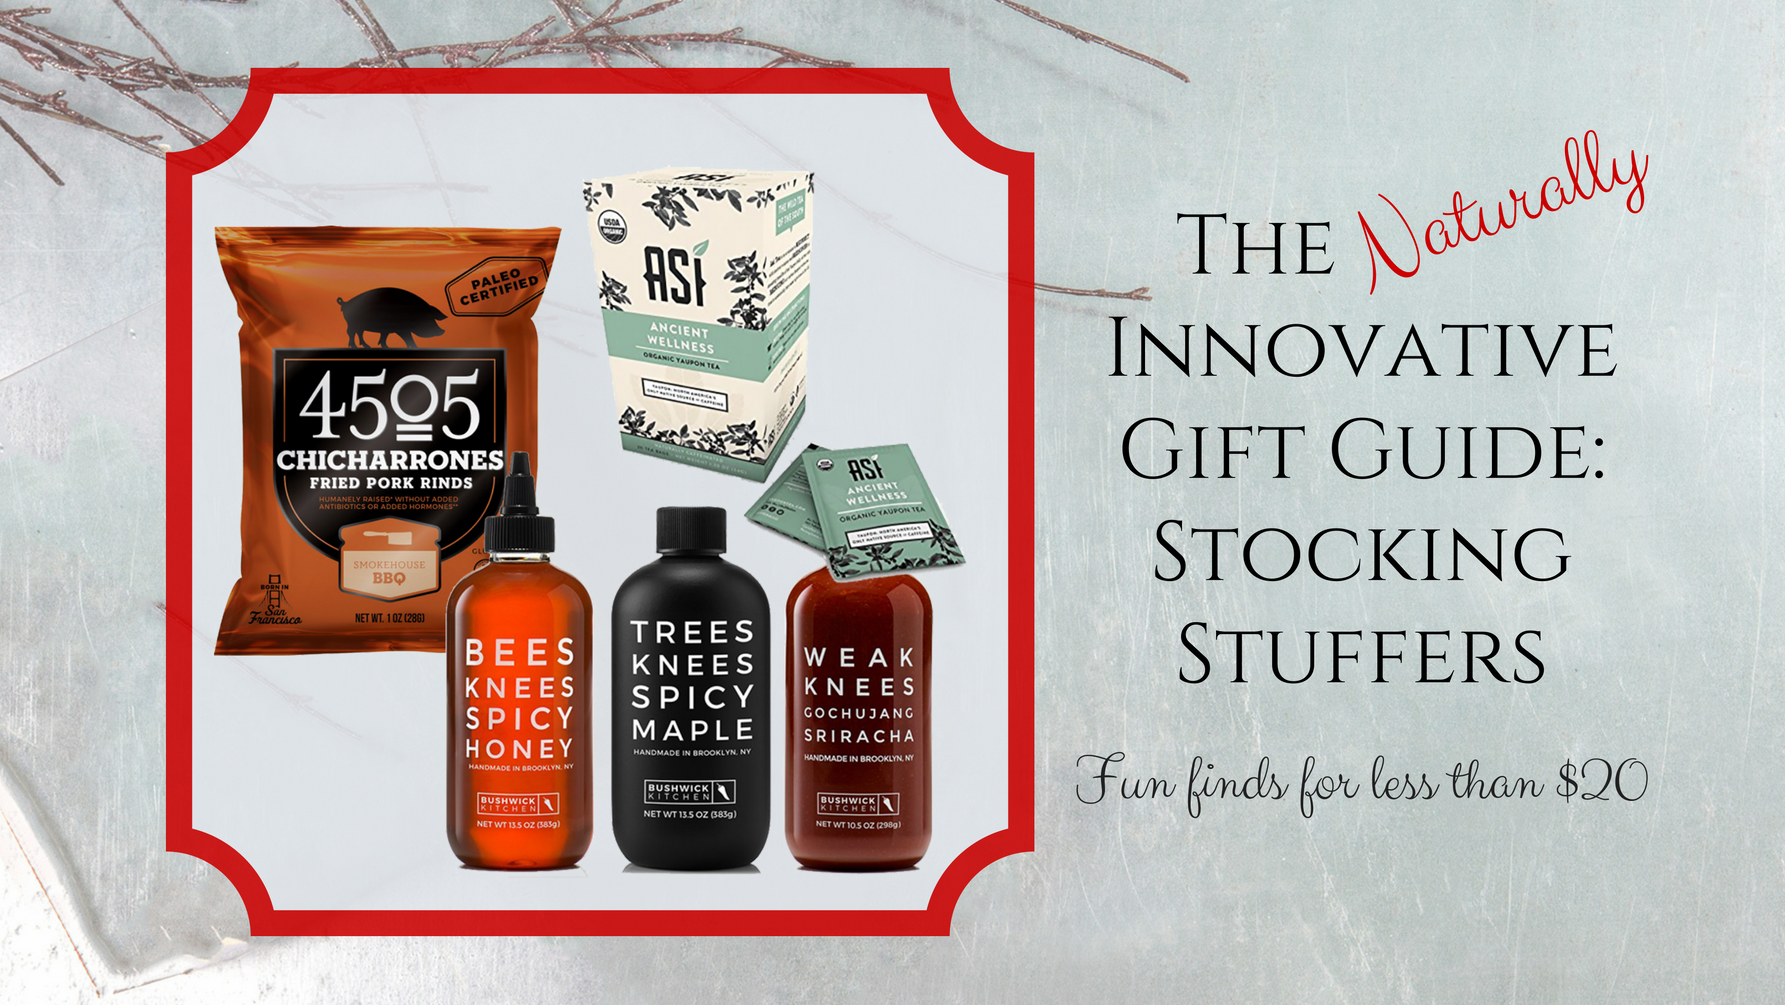 The Naturally Innovative Gift Guide: Stocking Stuffers